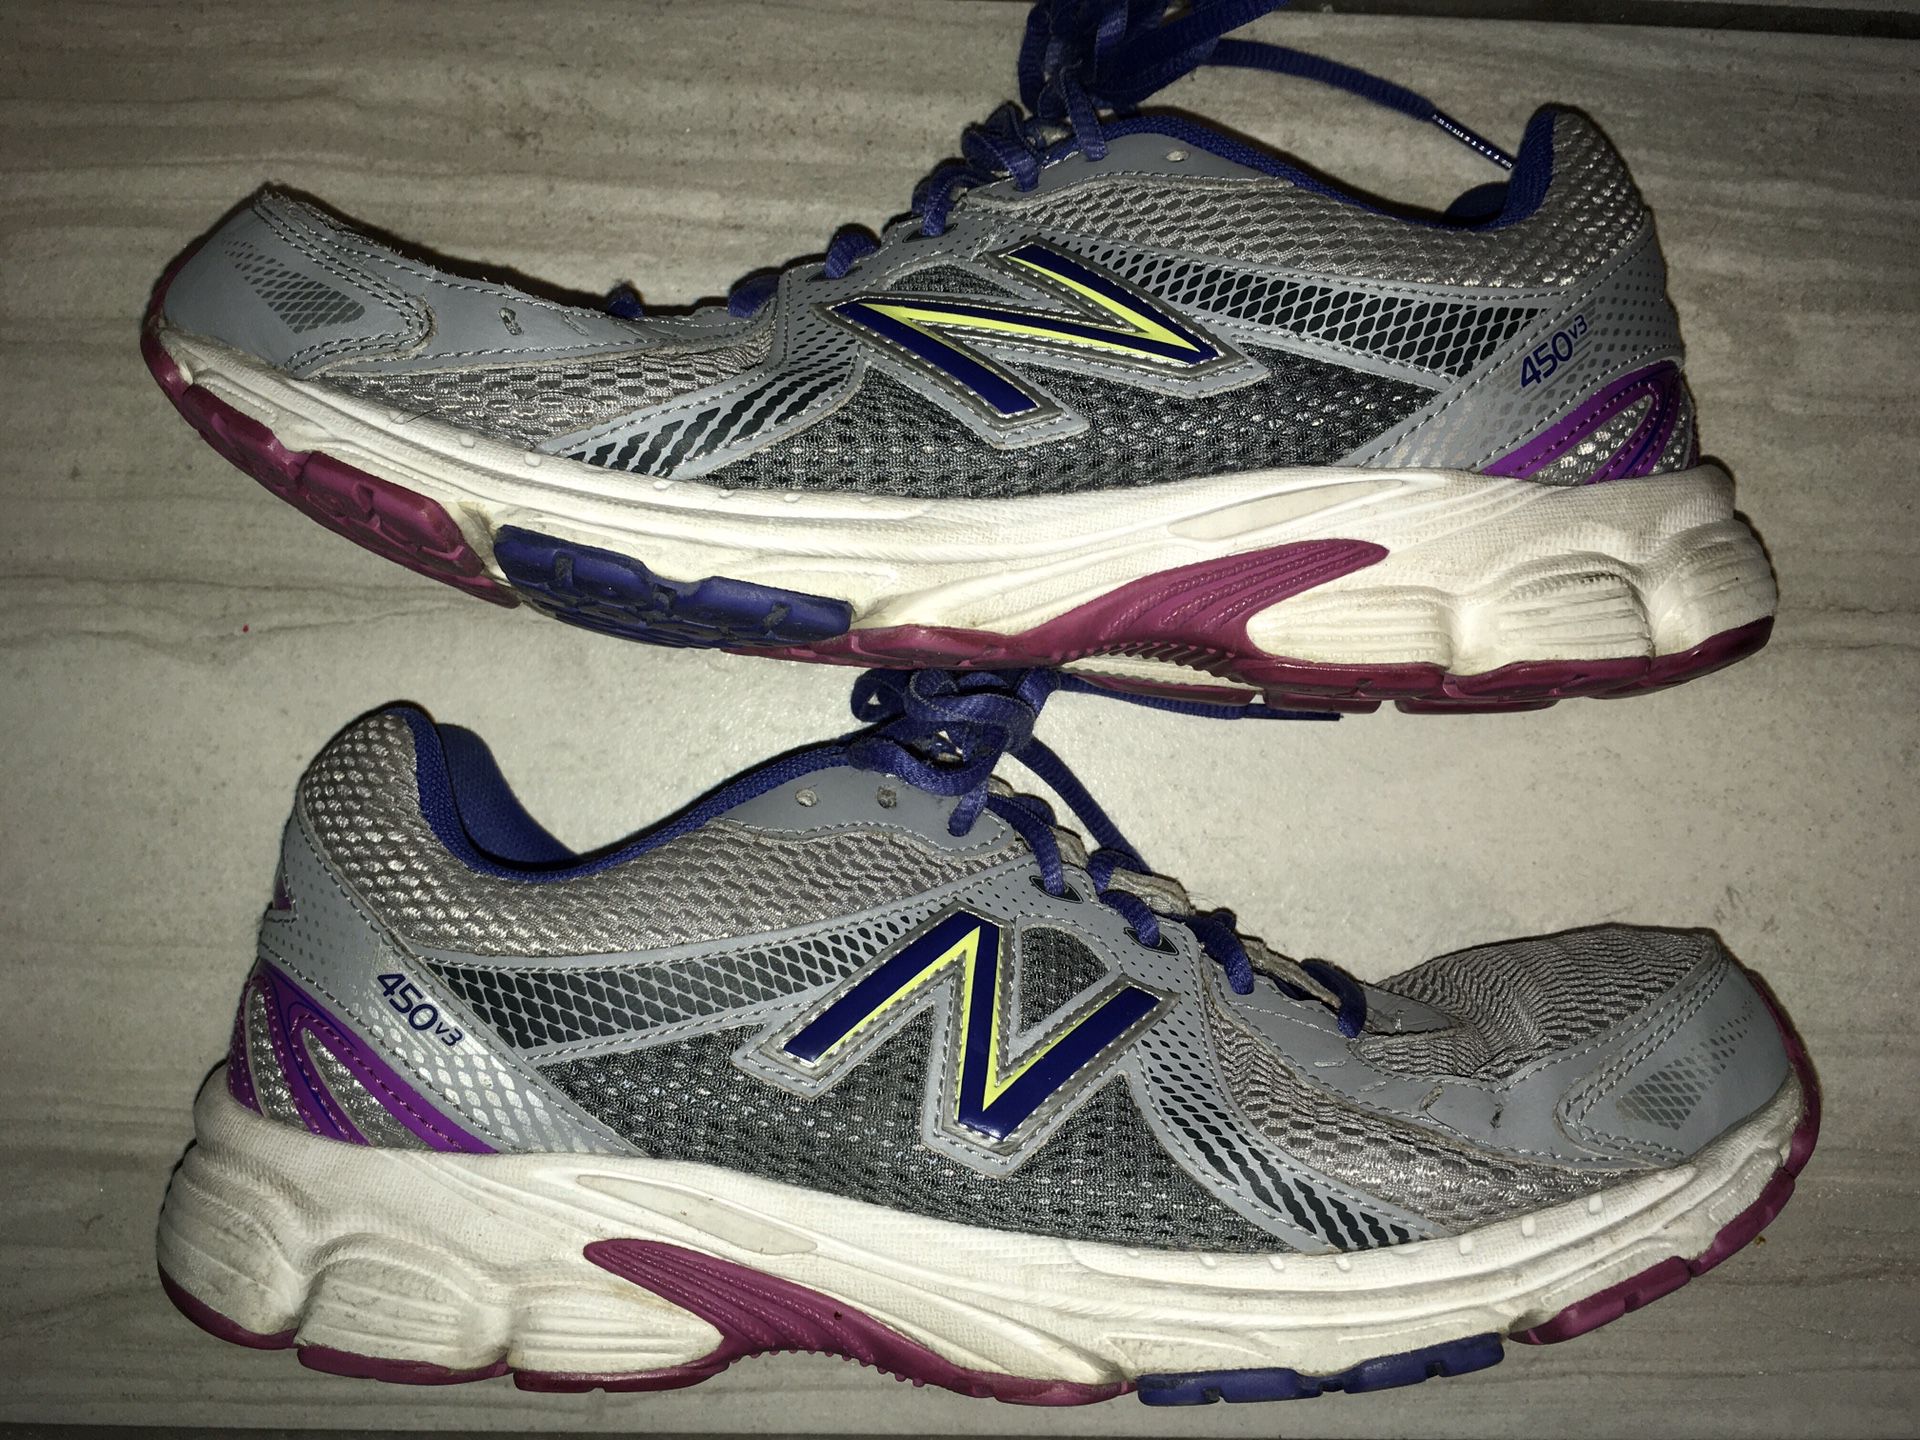 New Balance 450 v3 adult size 10 running shoes for Sale in San Antonio, TX OfferUp